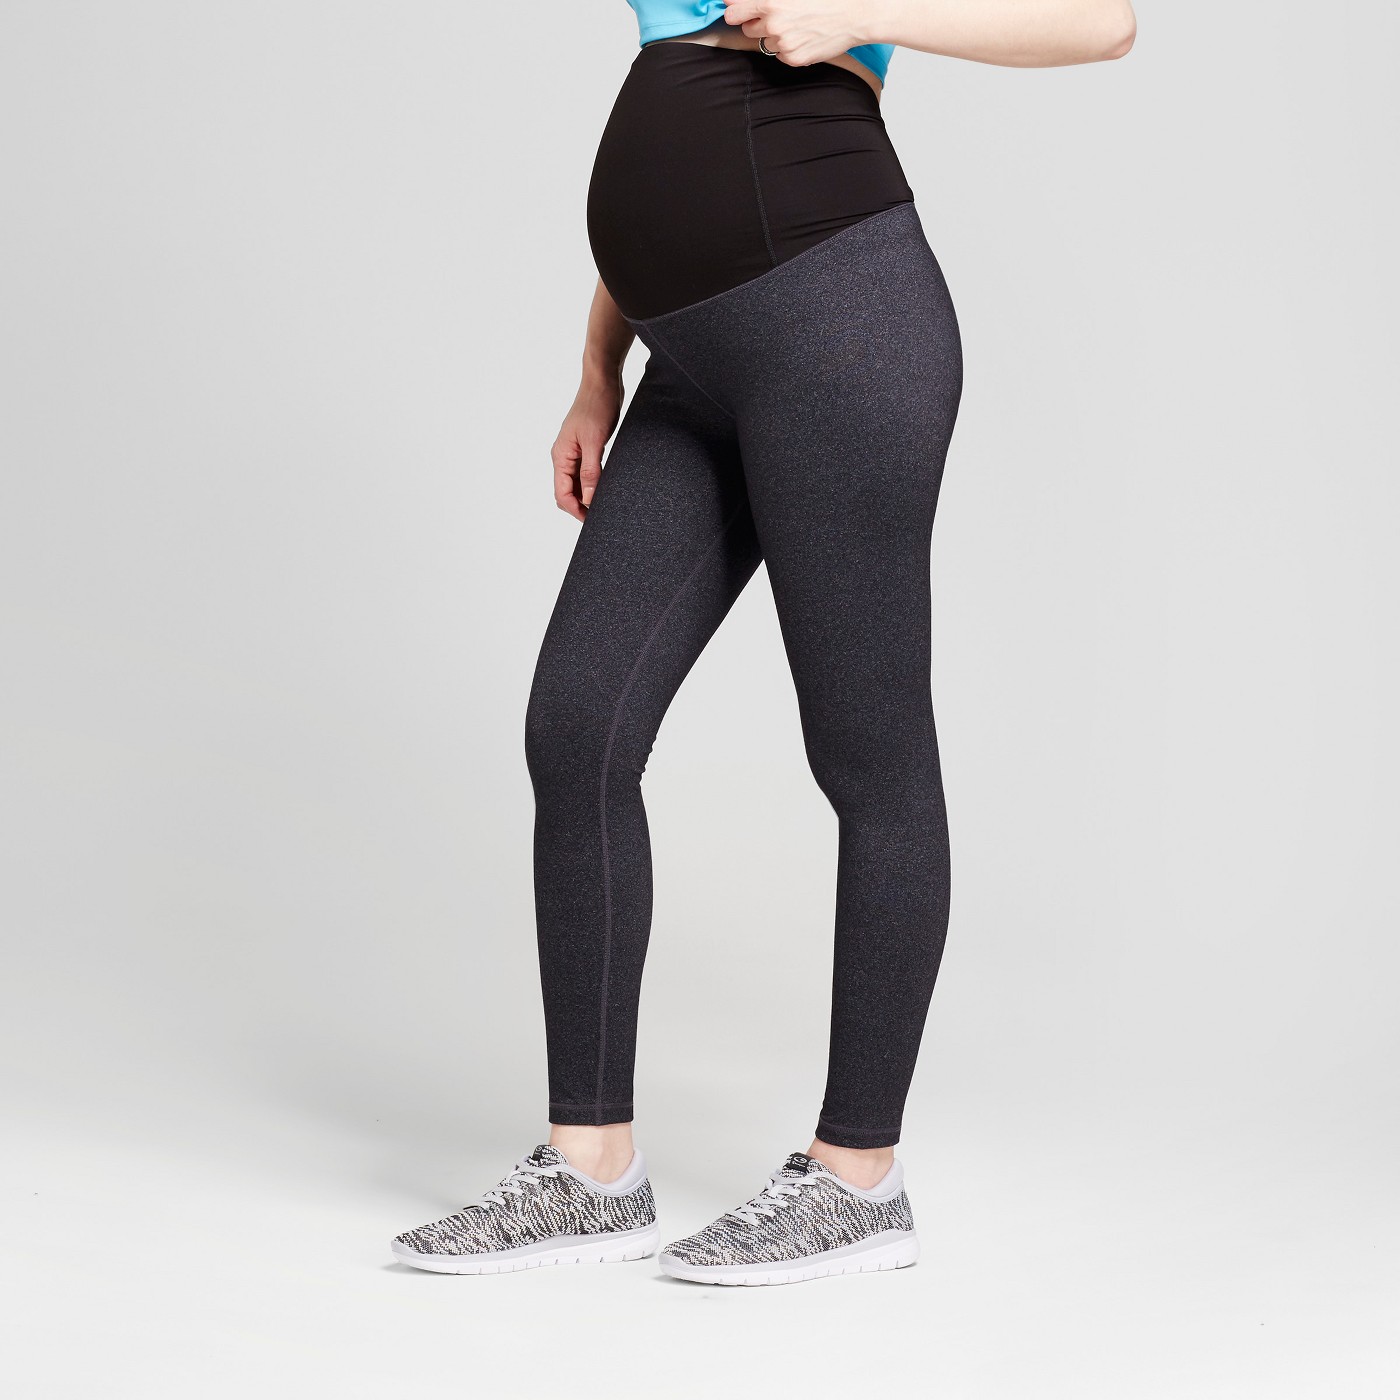 Stay Active In These Maternity Workout Clothes | Who What Wear UK